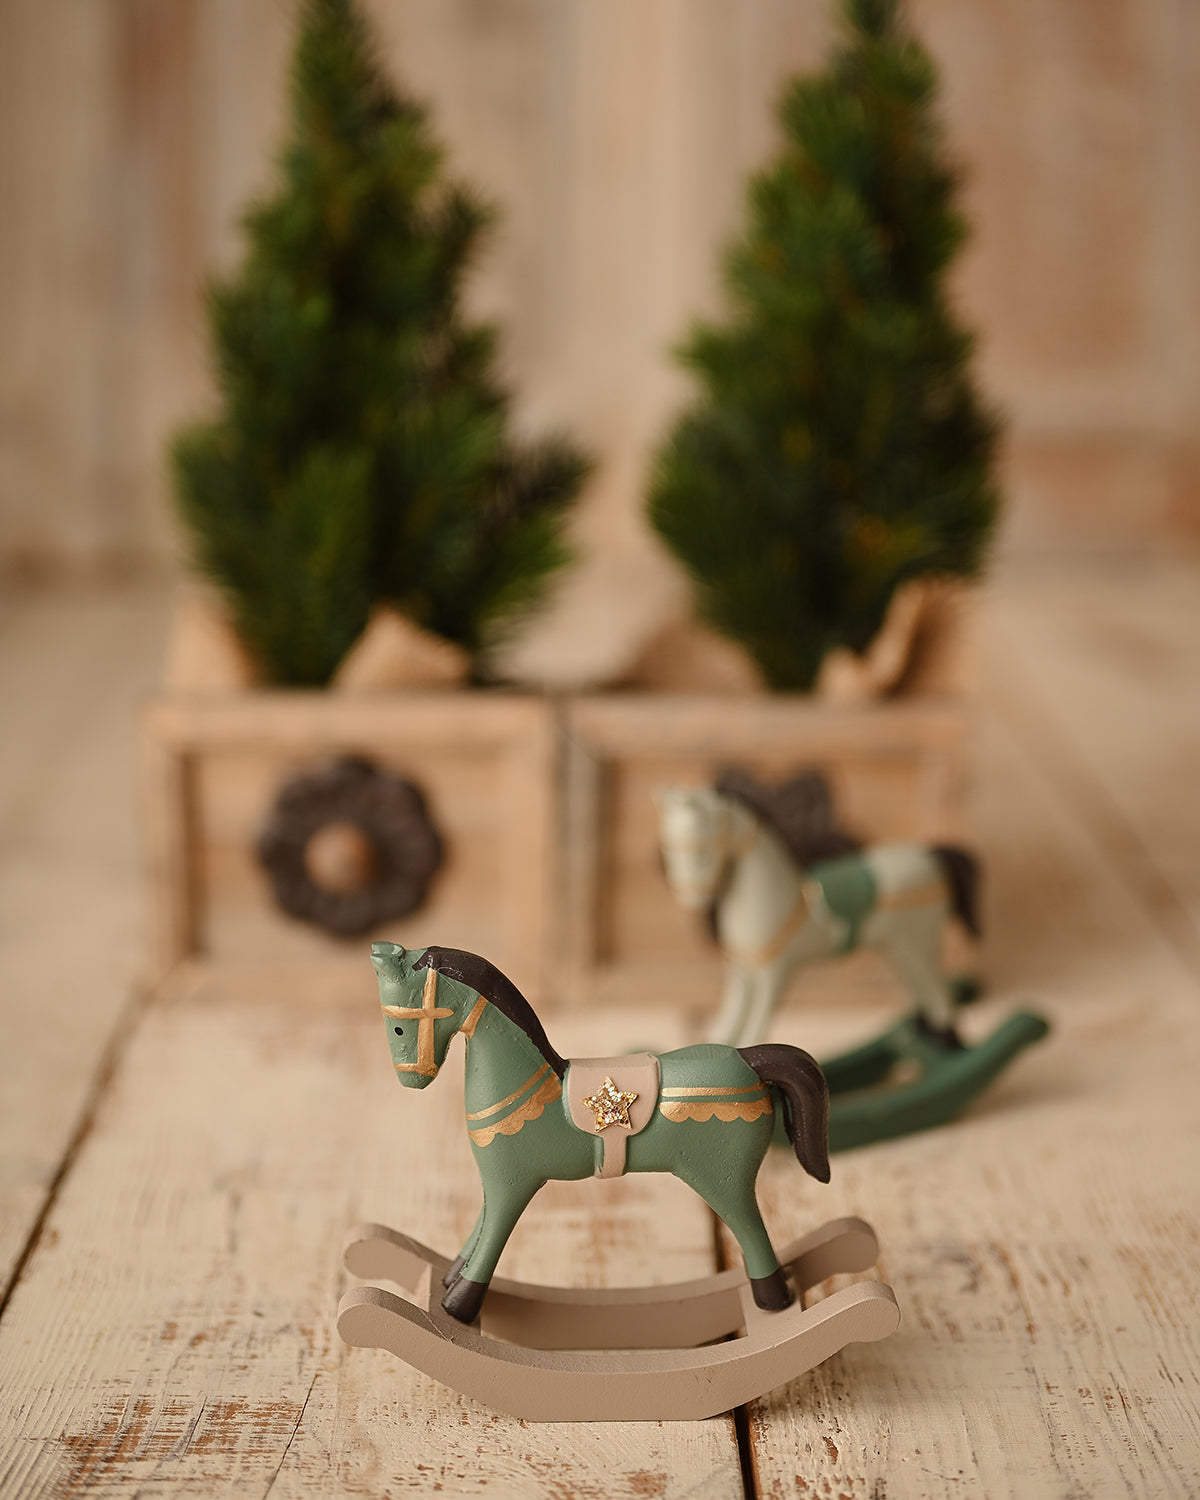 Pepe - Mint and gold wooden rocking horse